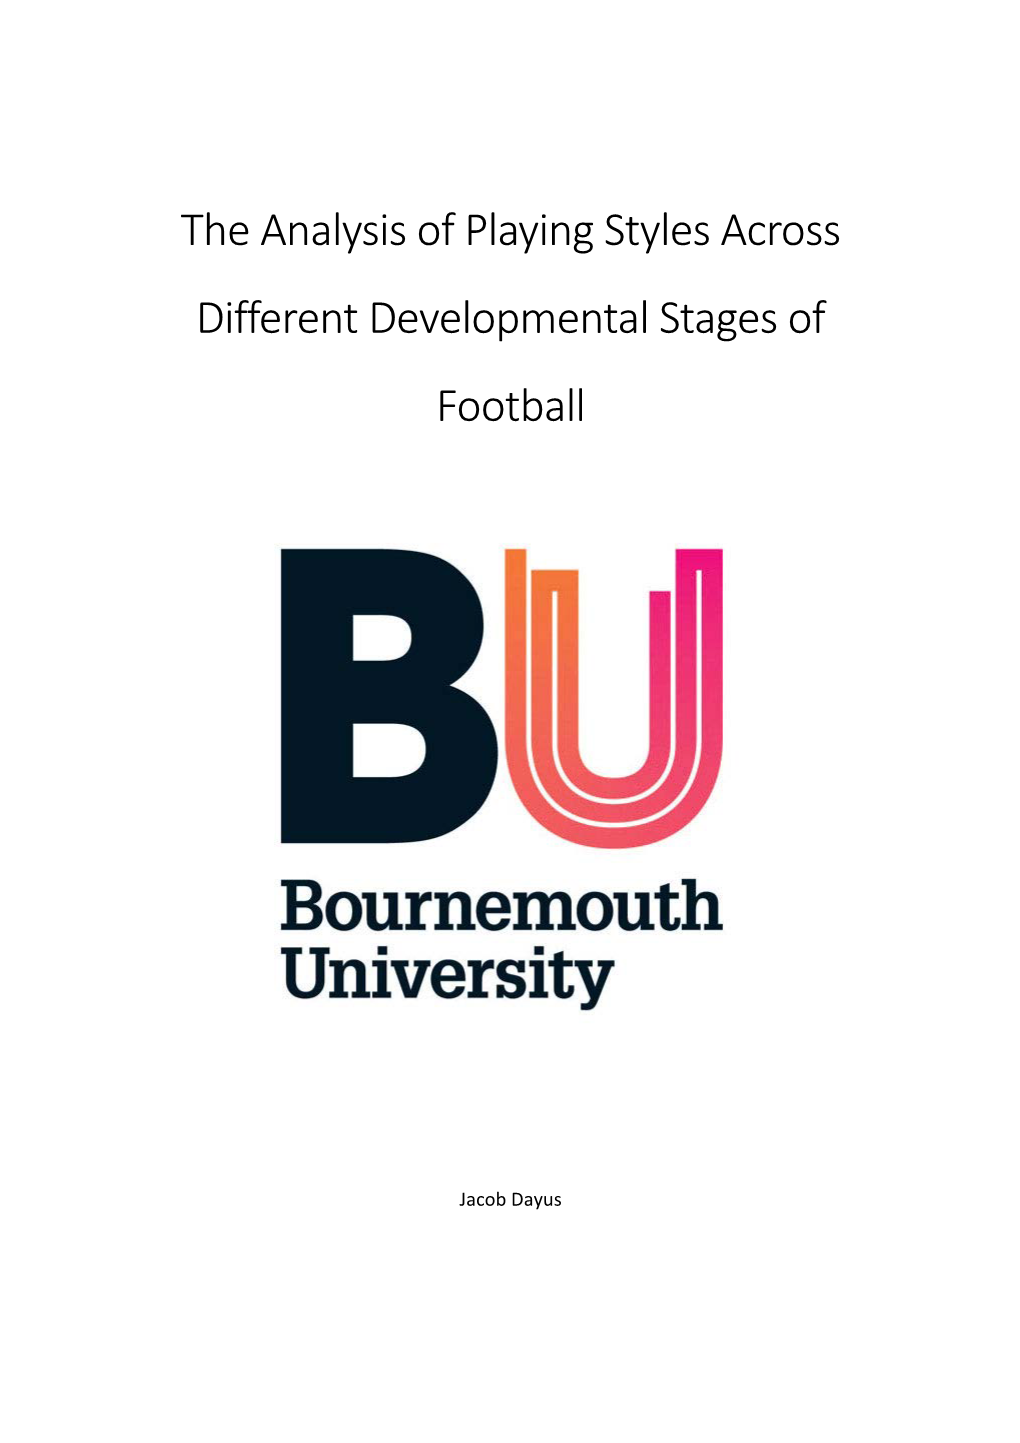 The Analysis of Playing Styles Across Different Developmental Stages of Football